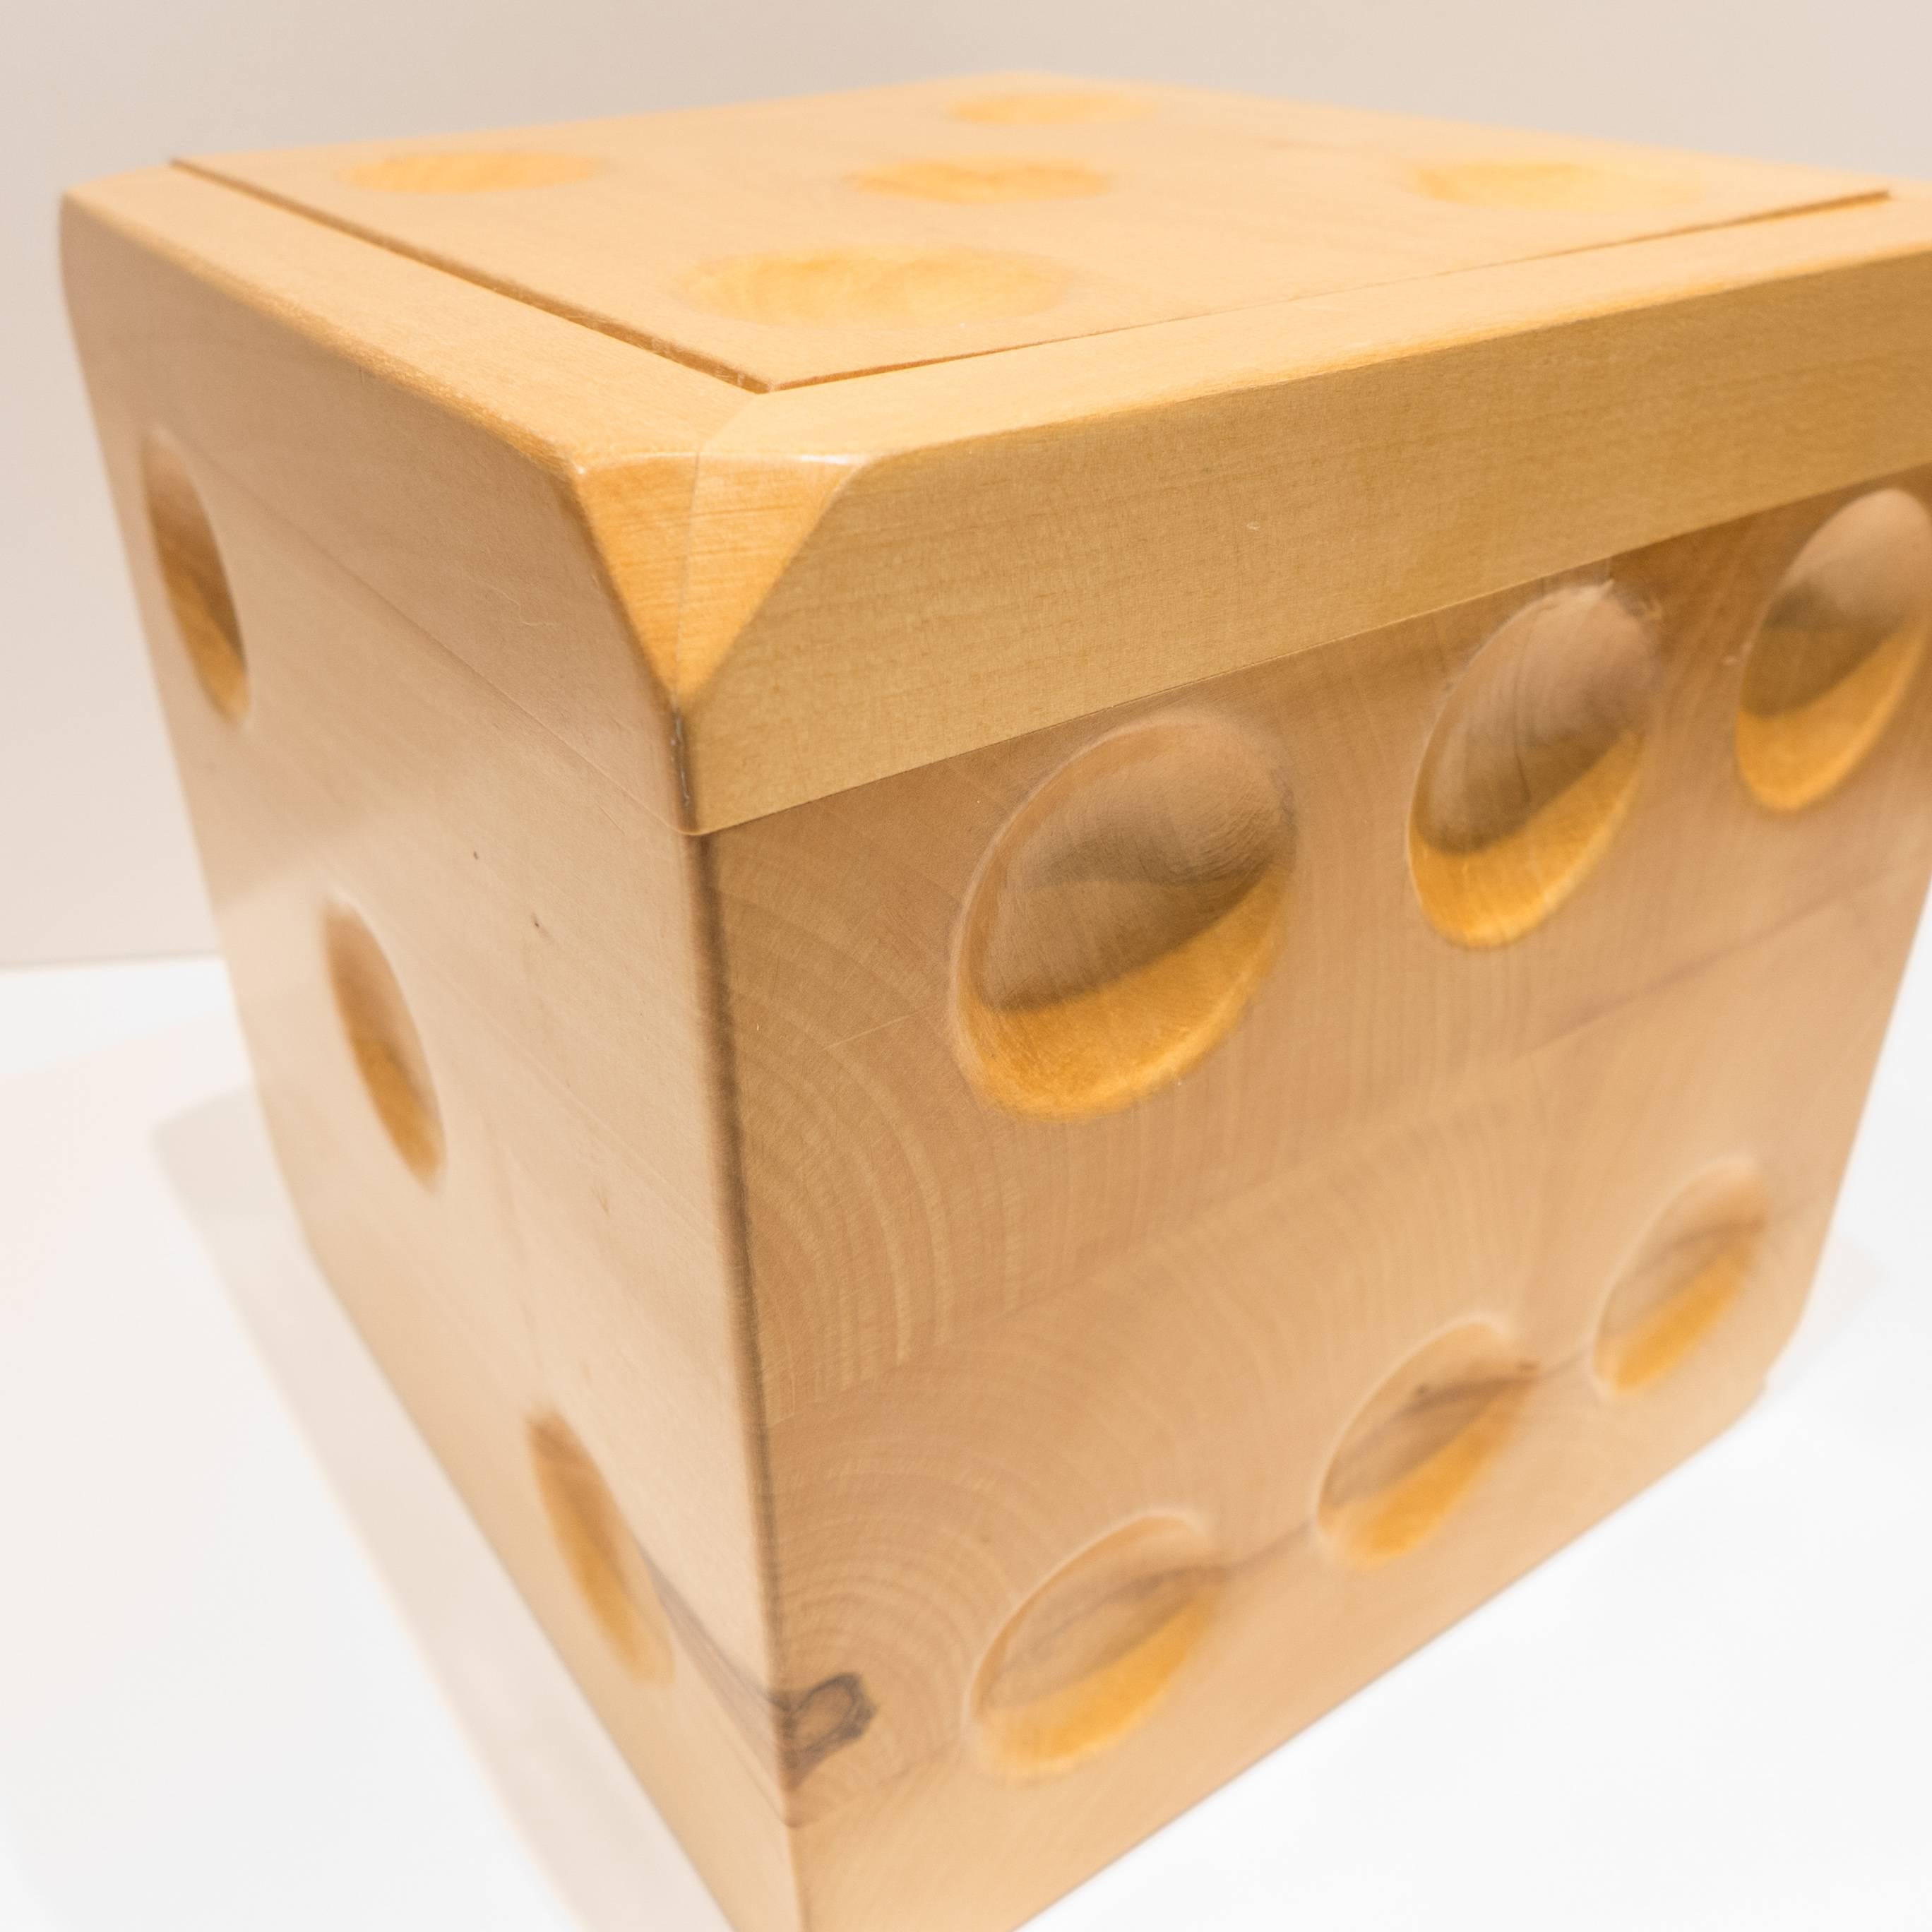 Carved Wooden Dice Ice Bucket